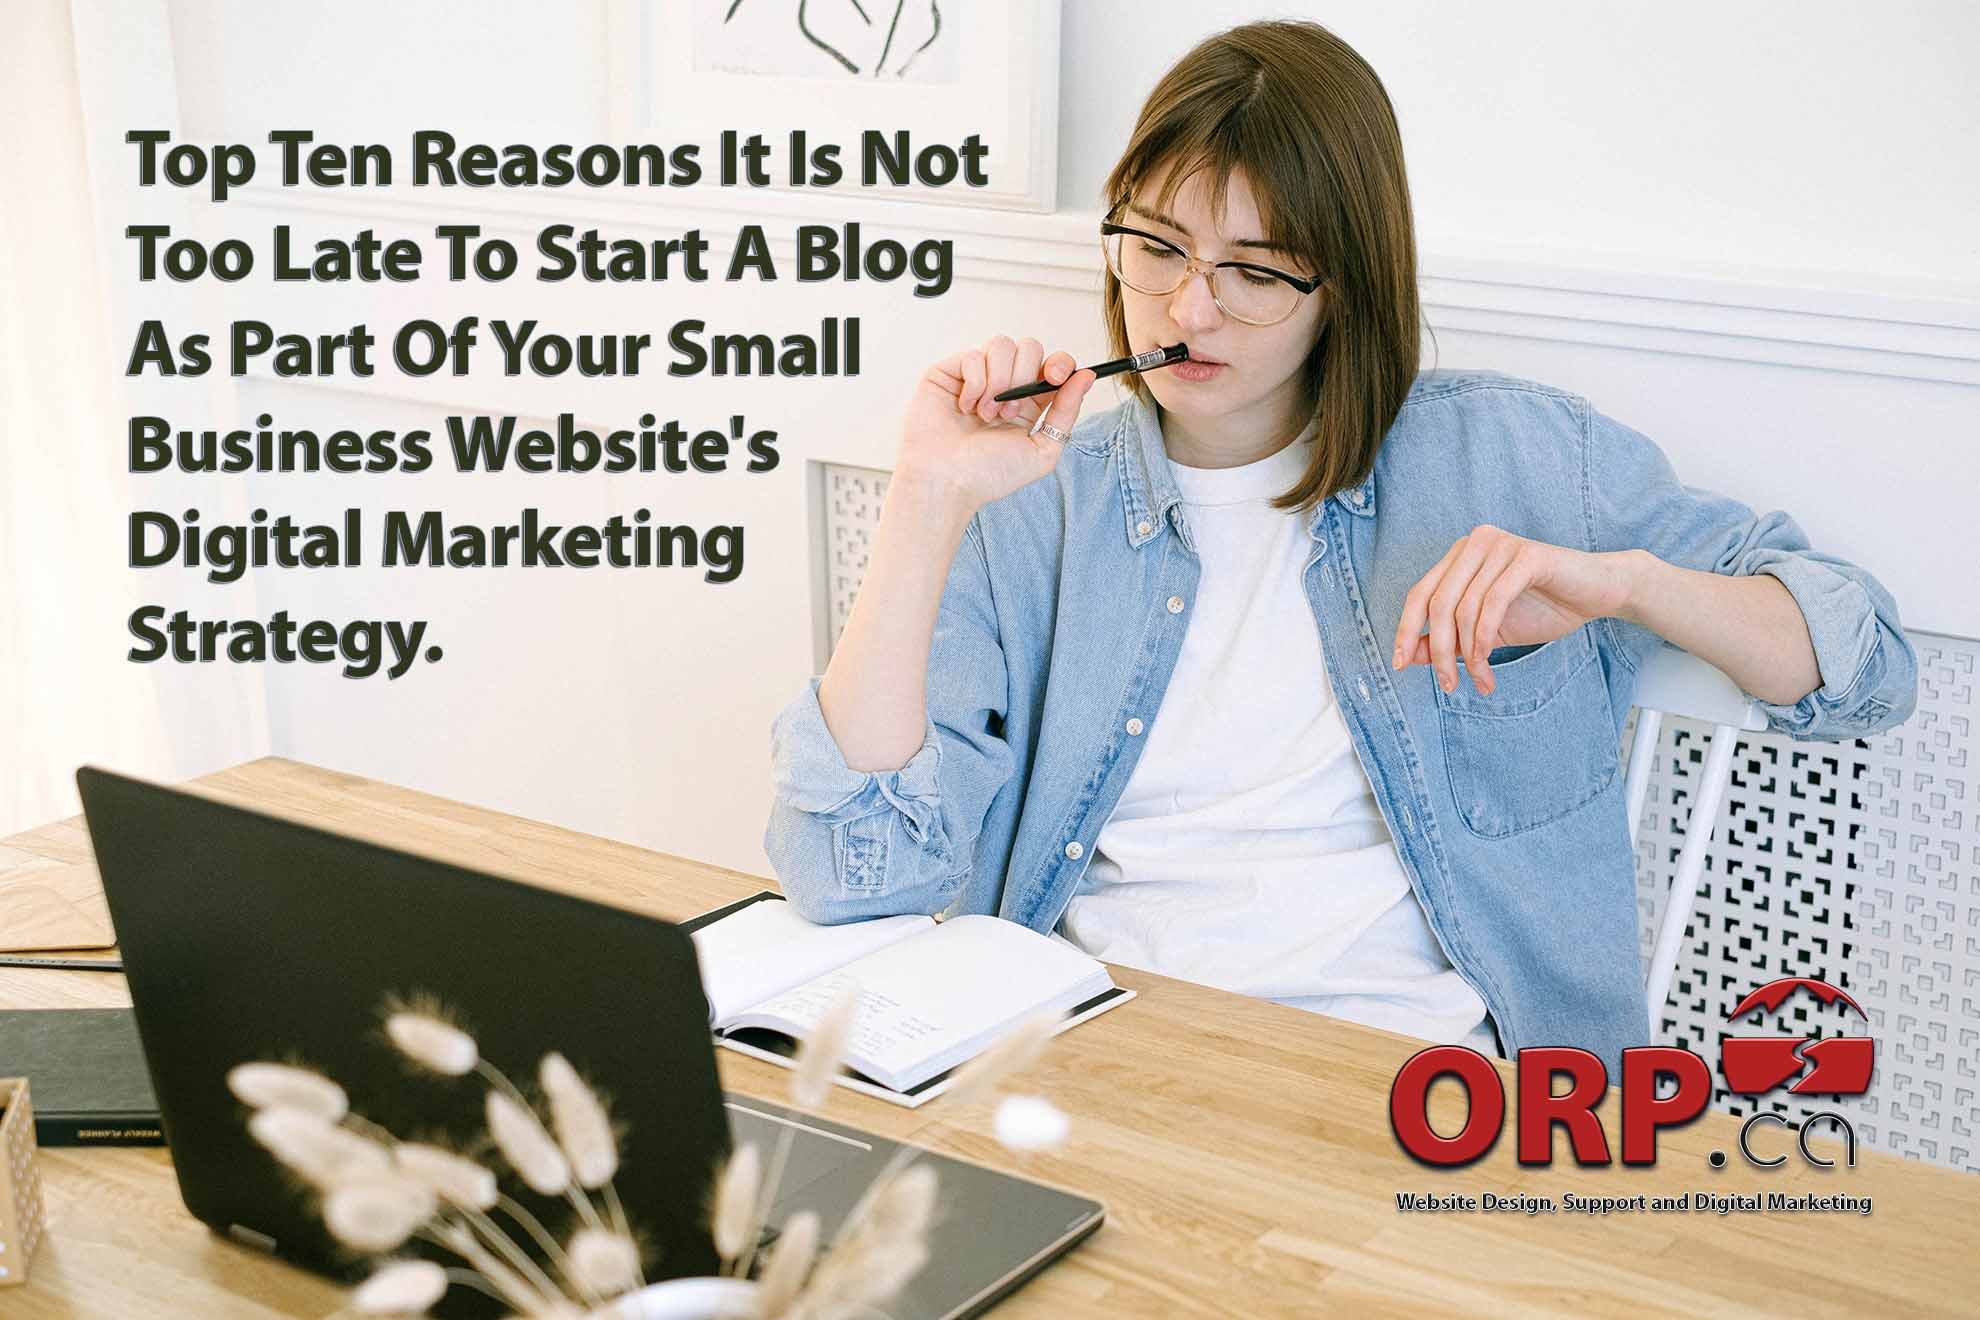 Top Ten Reasons It Is Not Too Late To Start A Blog As Part Of Your Small Business Websites Digital Marketing Strategy by ORP.ca Website and Digital Marketing Services for small Businesses and Business Professional